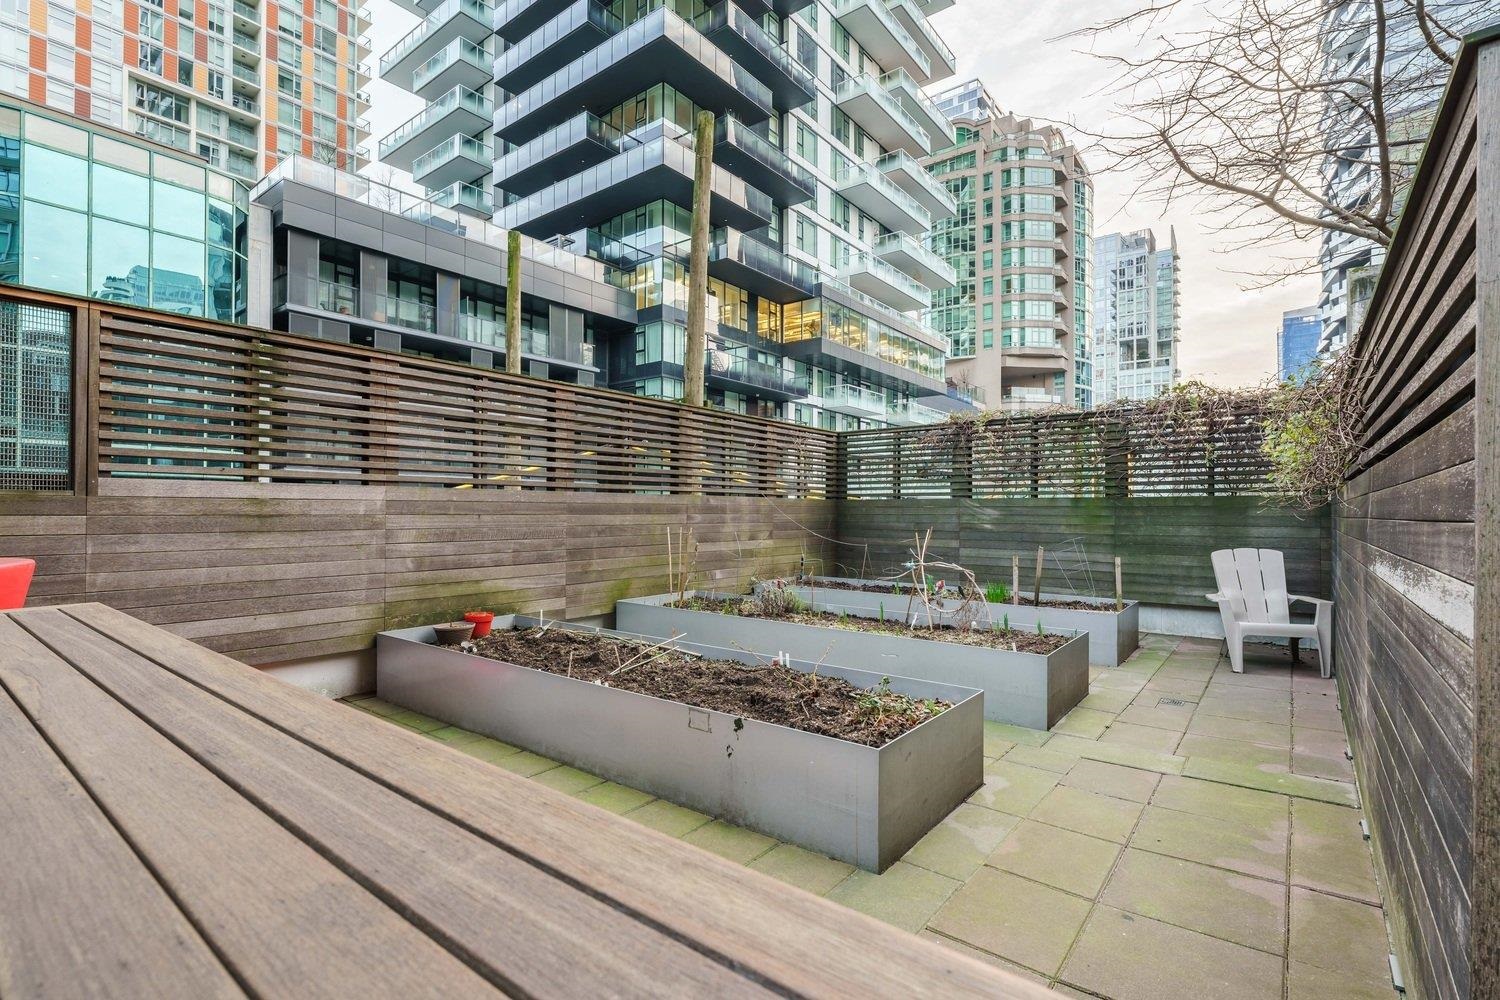 Listing image of 1601 1308 HORNBY STREET